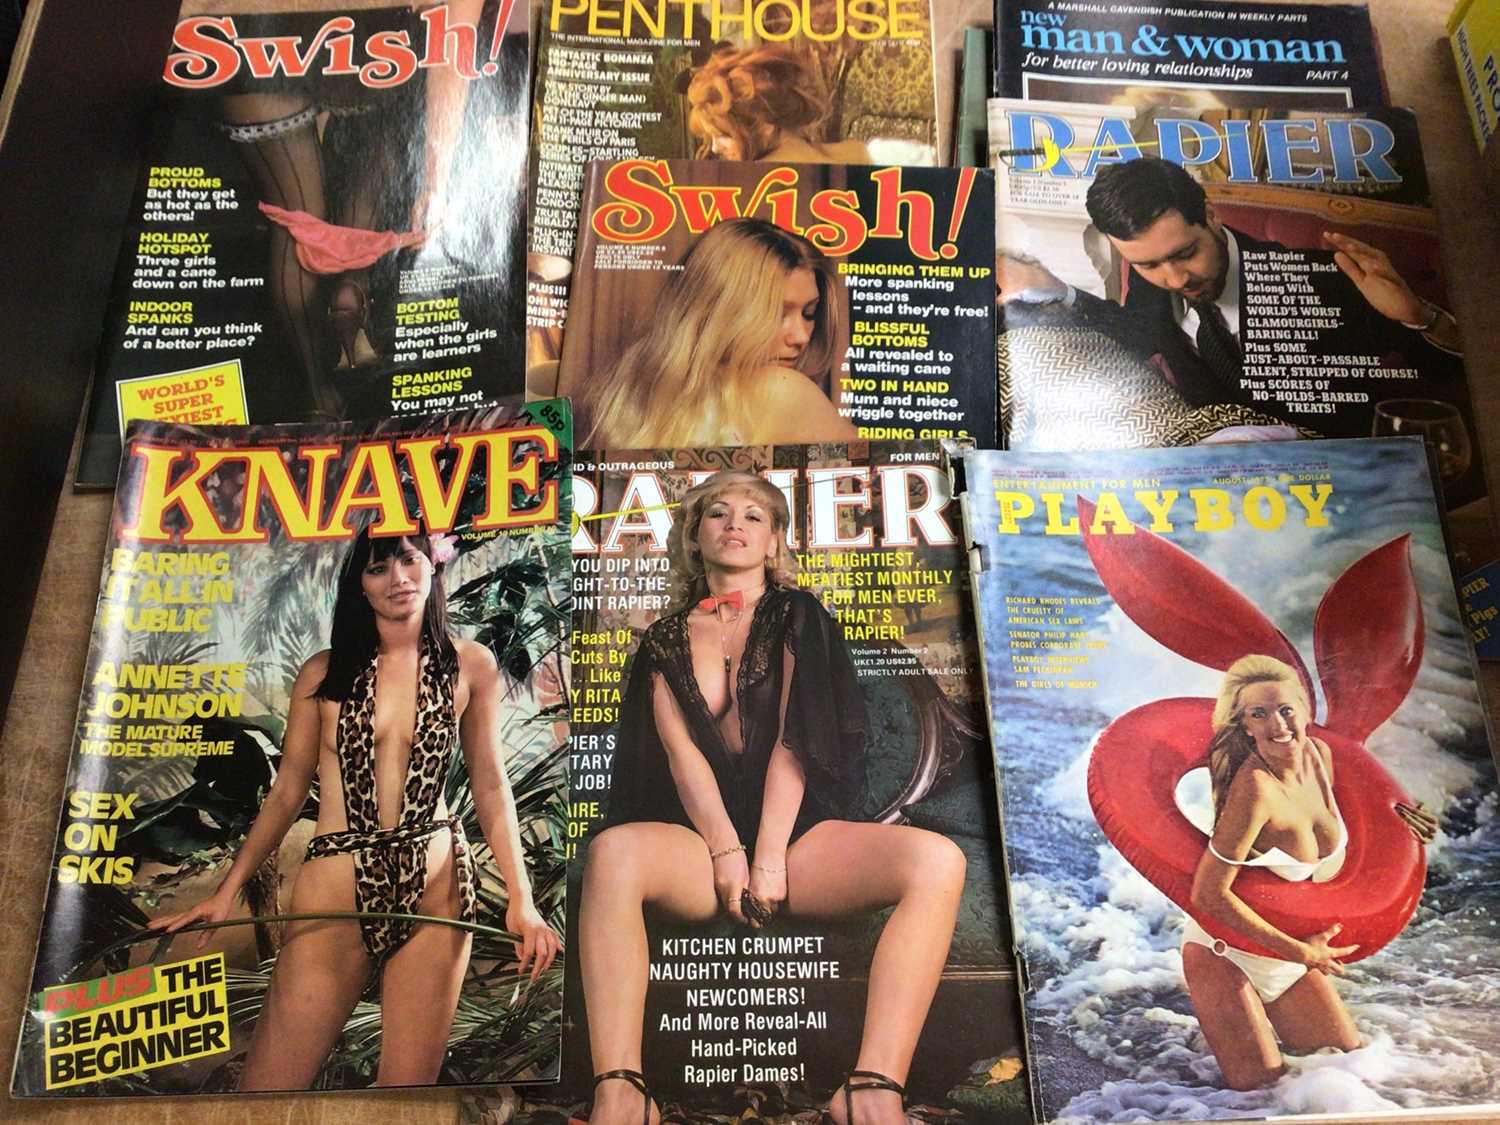 Lot 417 - Two boxes of vintage adult magazines and